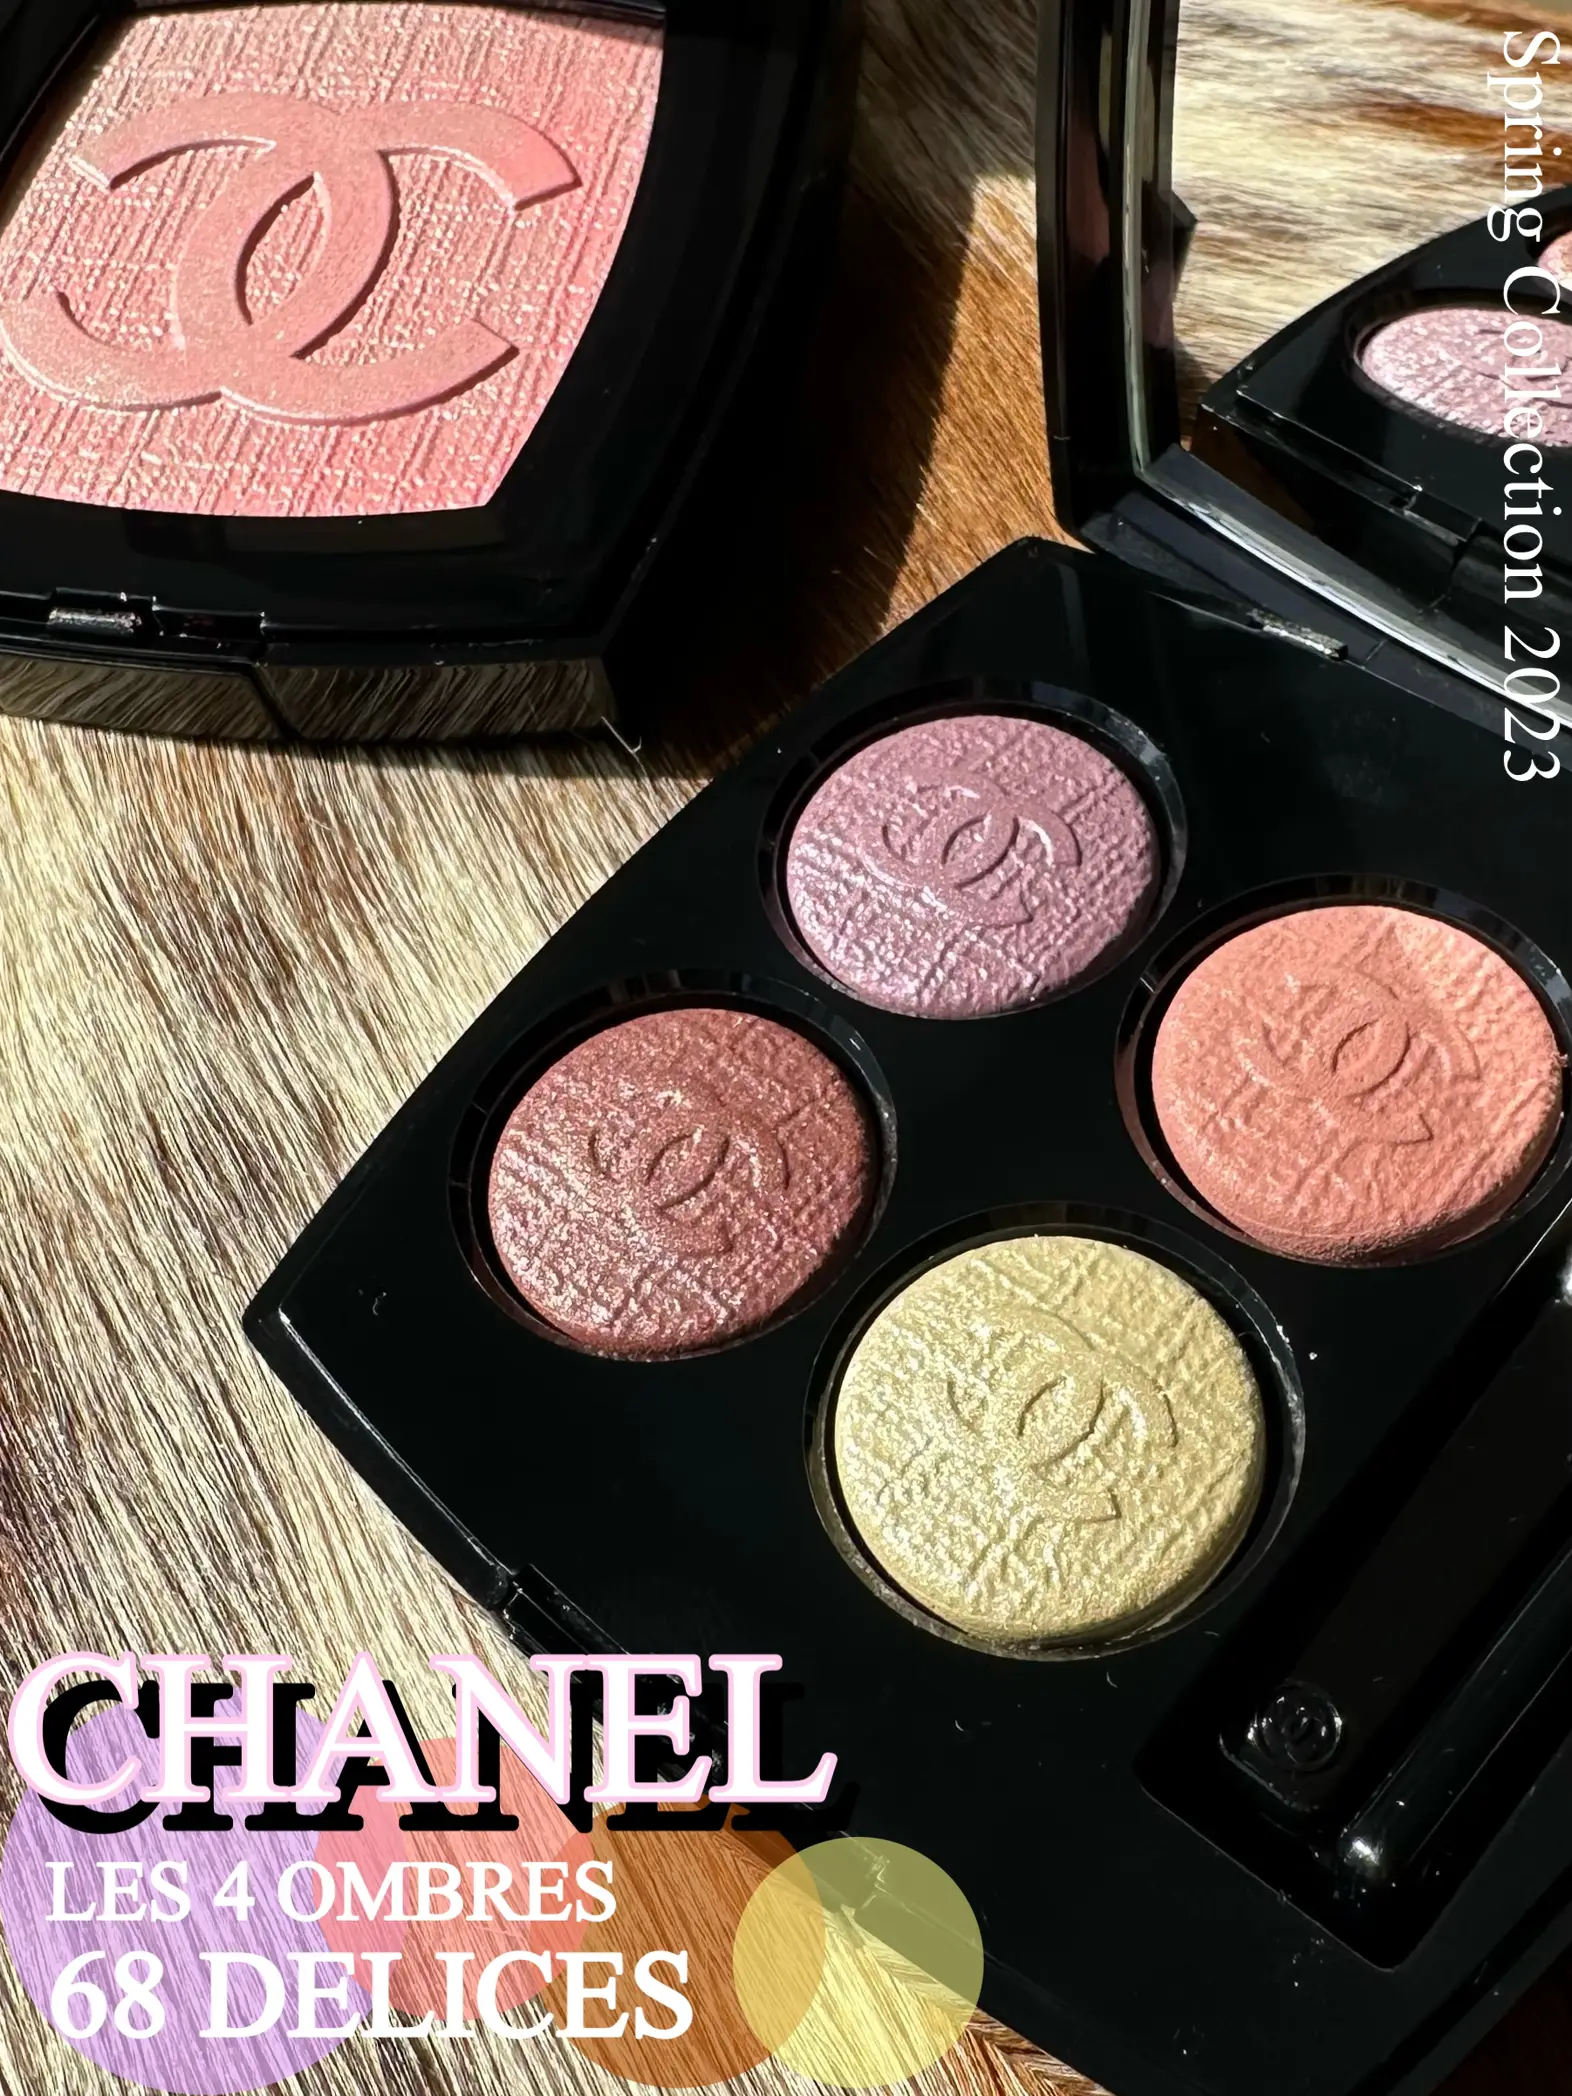 CHANEL Spring Cosmetics /, Gallery posted by chamaru222